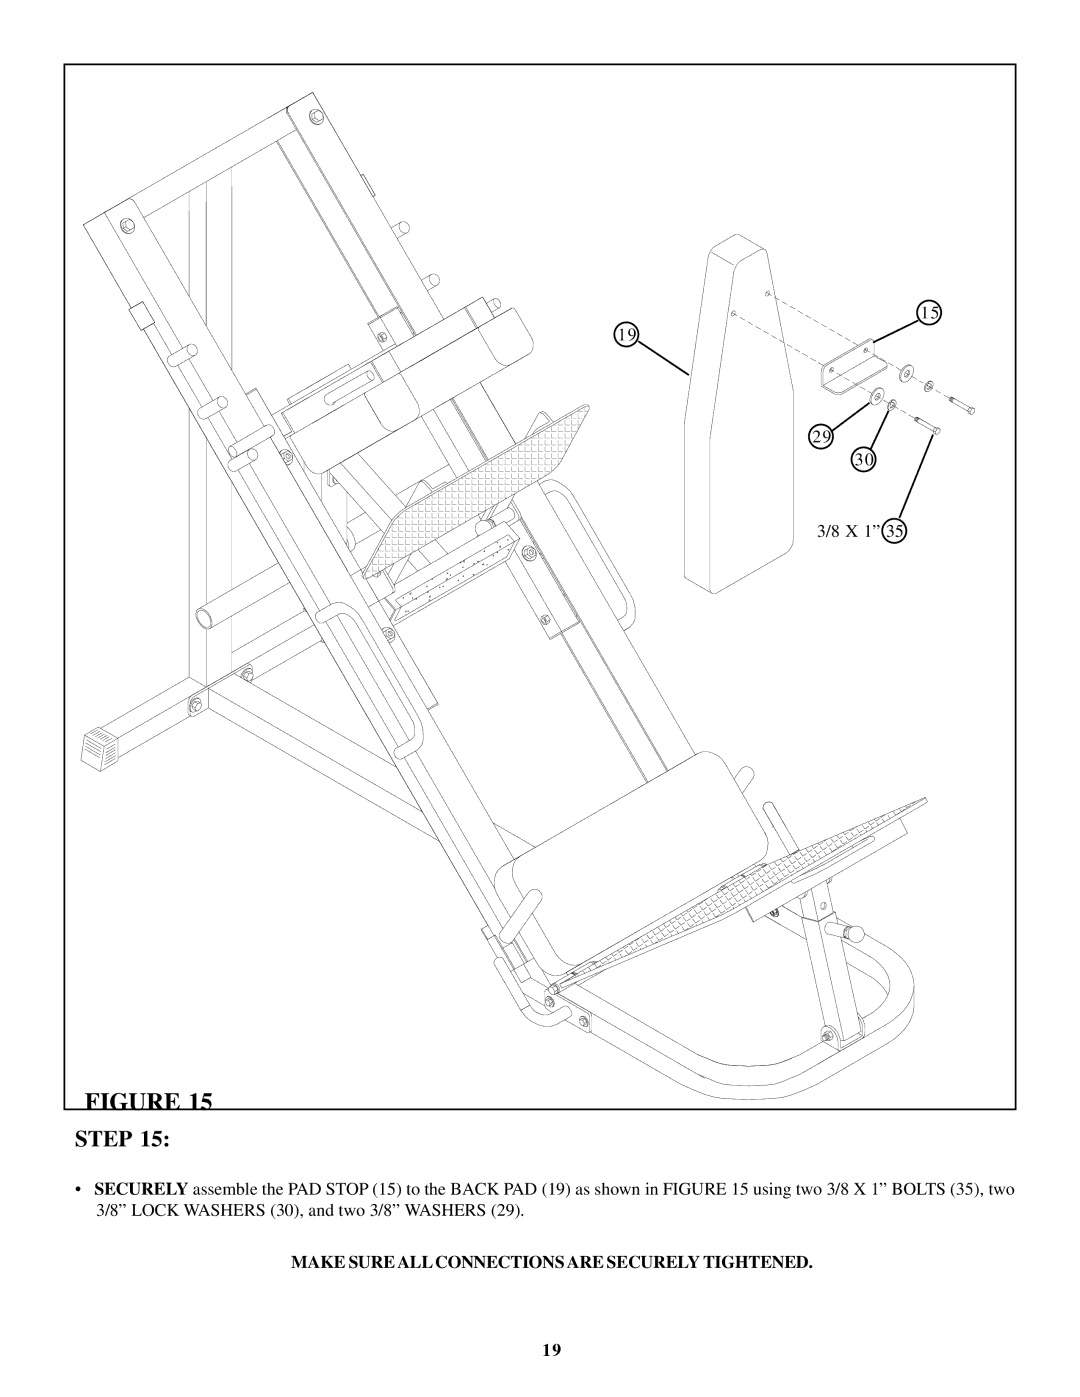 ParaBody Hip Sled System manual Make Sure ALL Connections are Securely Tightened 